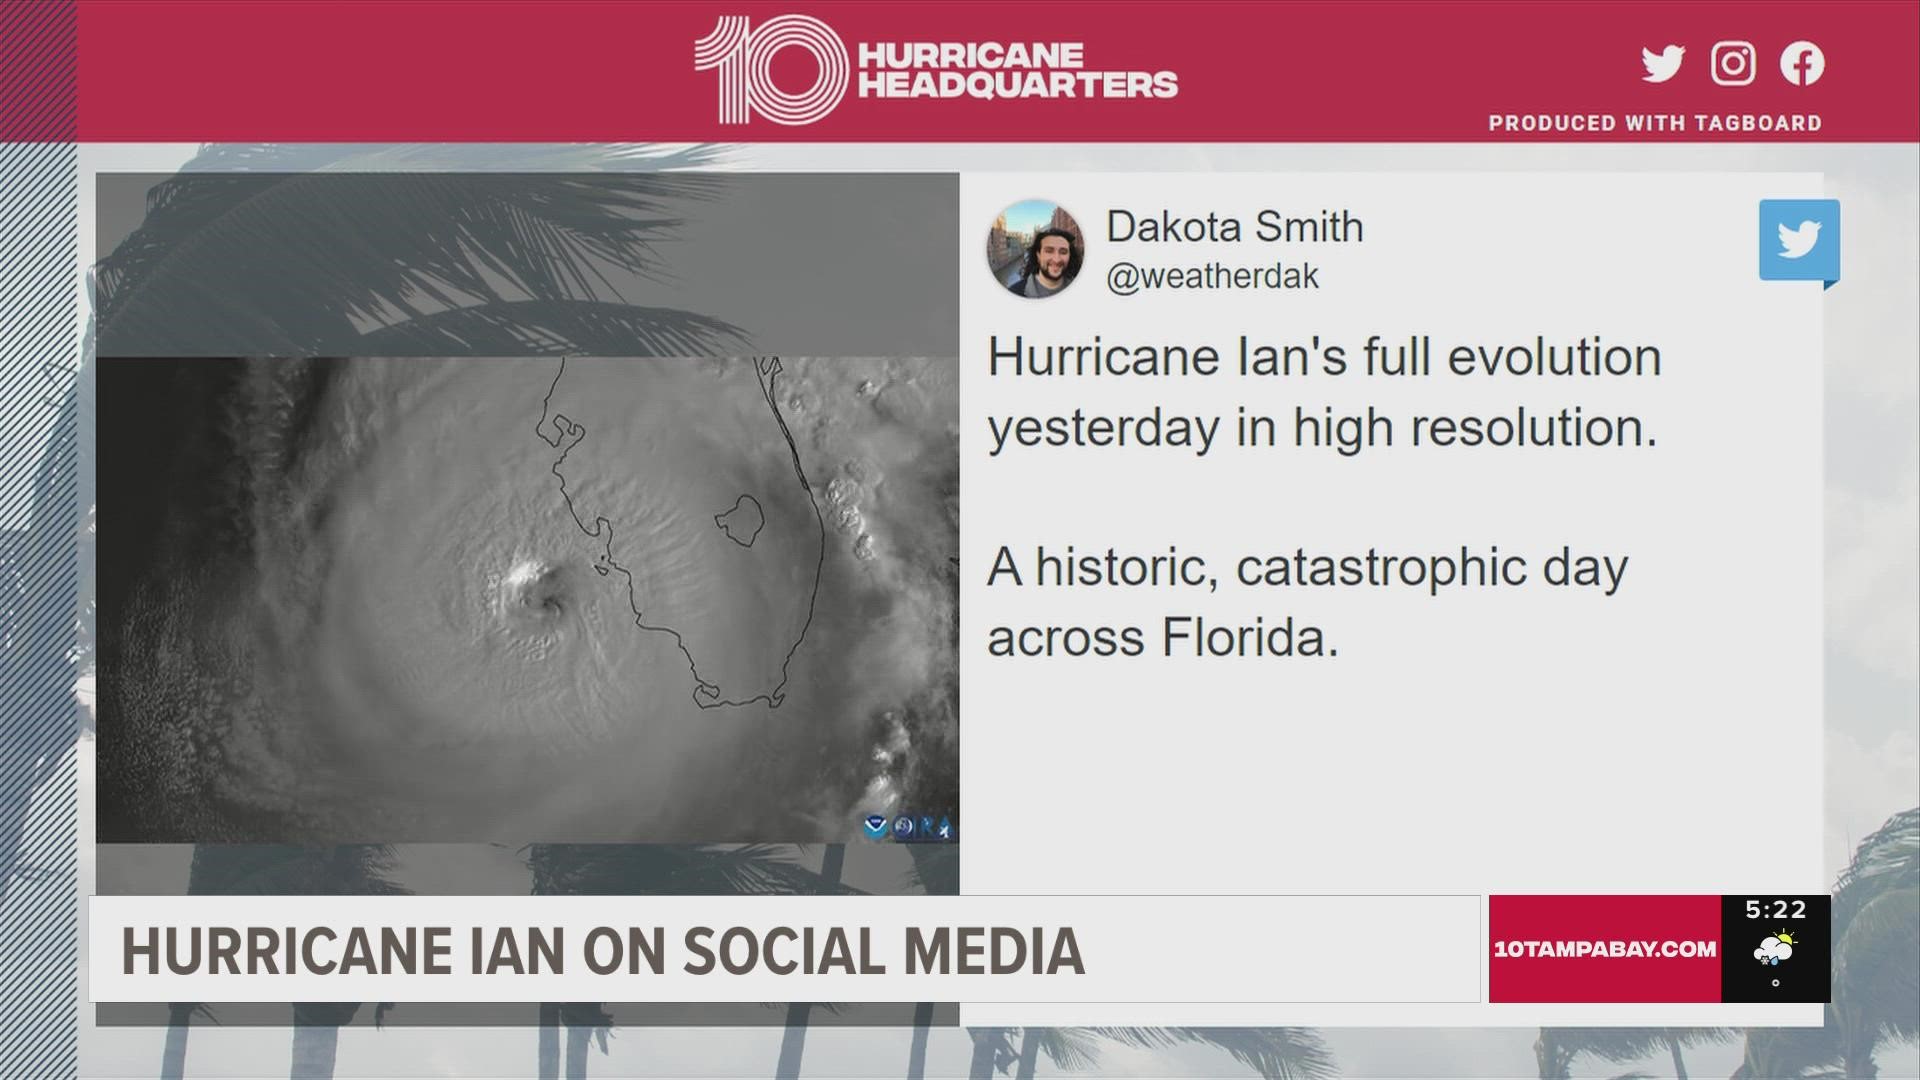 It was a catastrophic day across Florida, and a high resolution image shows the evolution of Hurricane Ian.